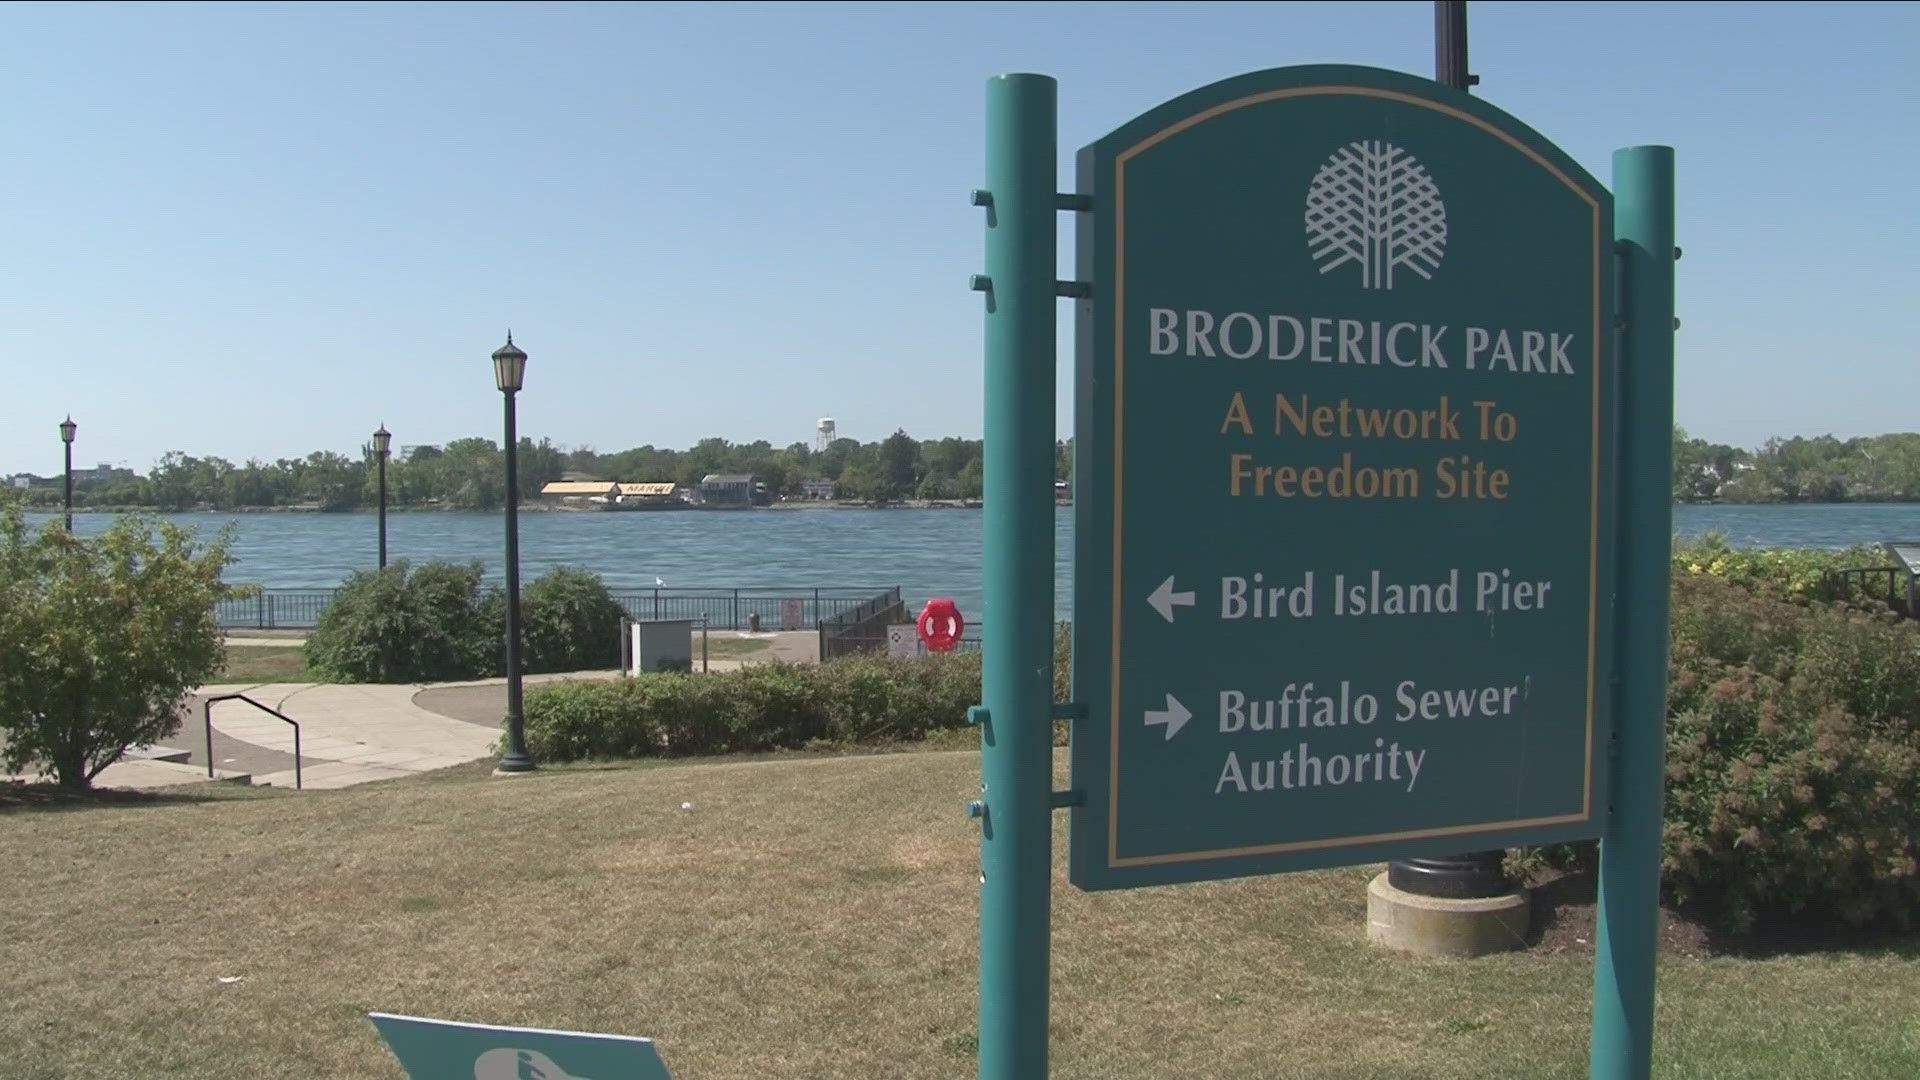 Proposal to change name of Broderick Park to Freedom Park